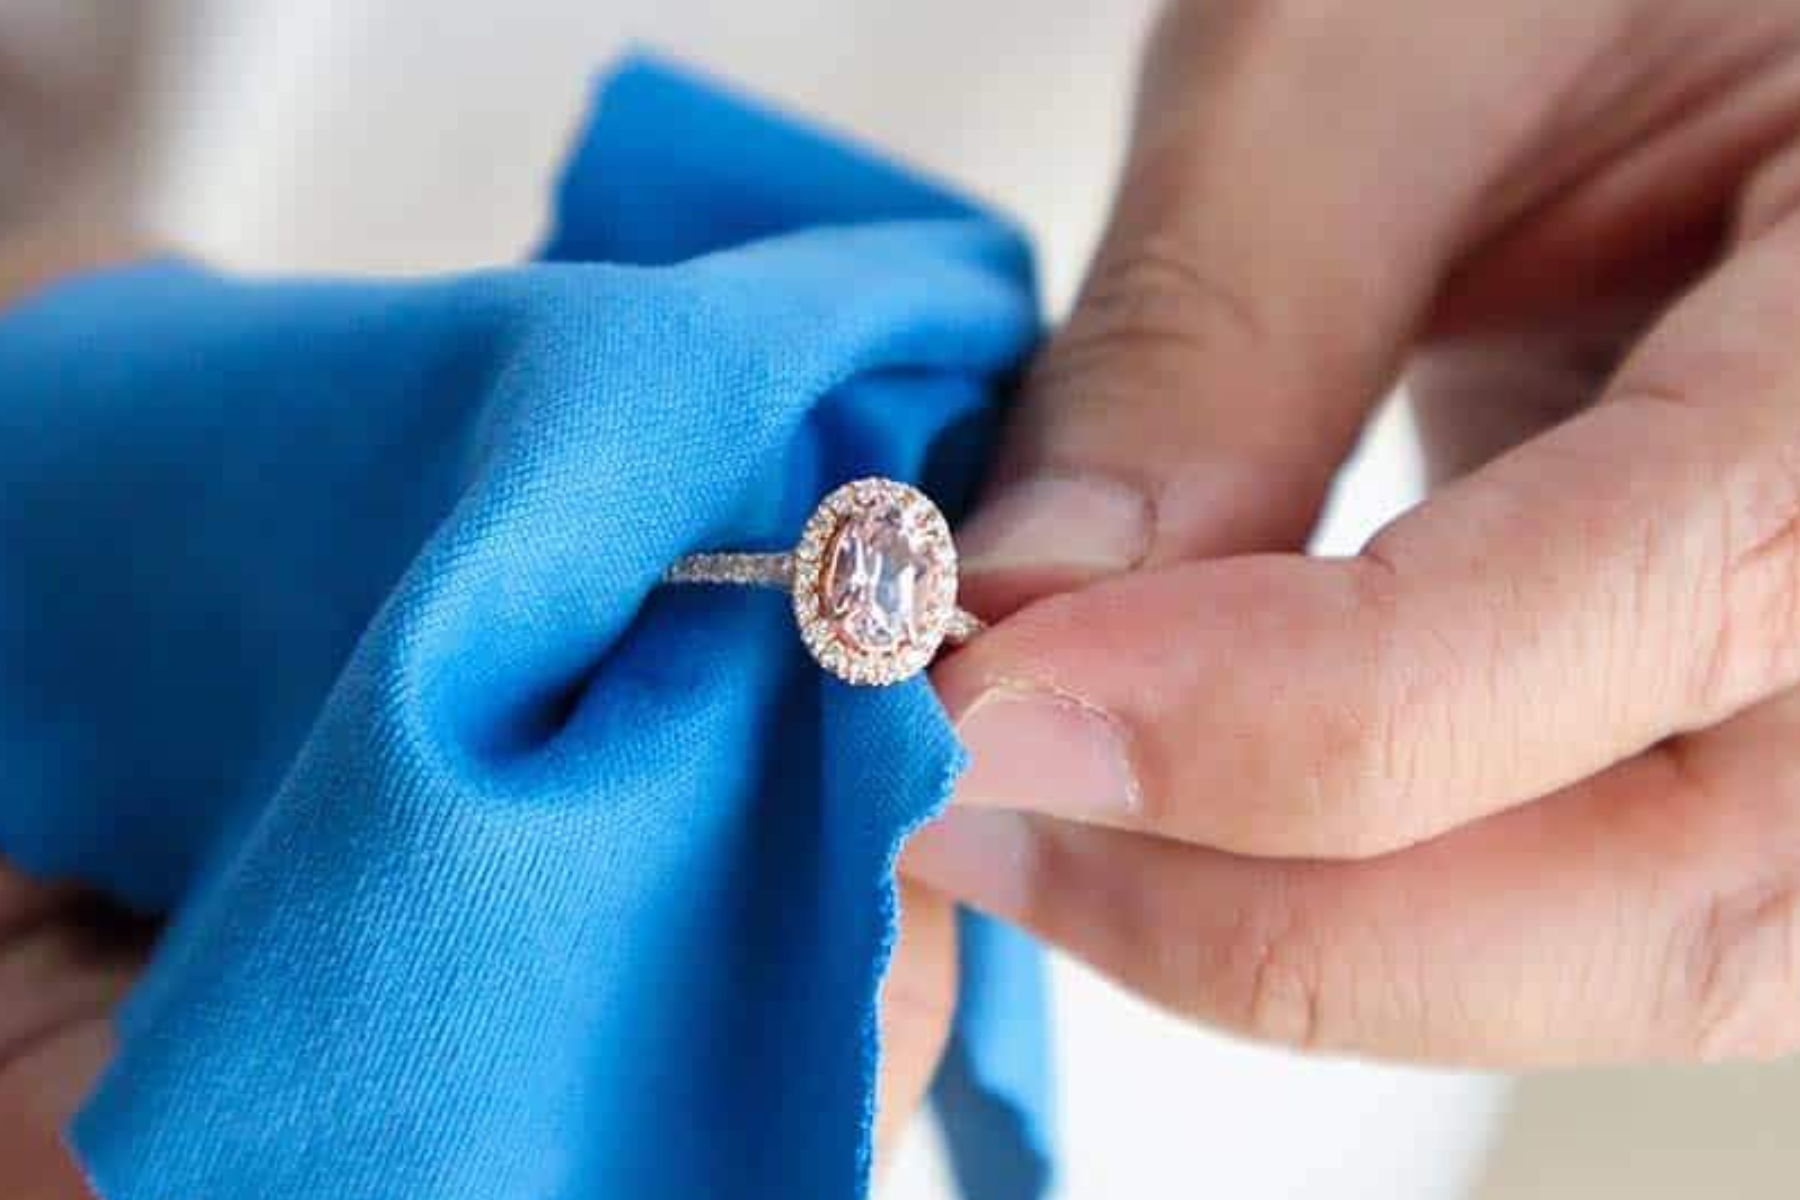 A woman's hand holding a blue cotton cloth while cleaning a colored diamond engagement ring